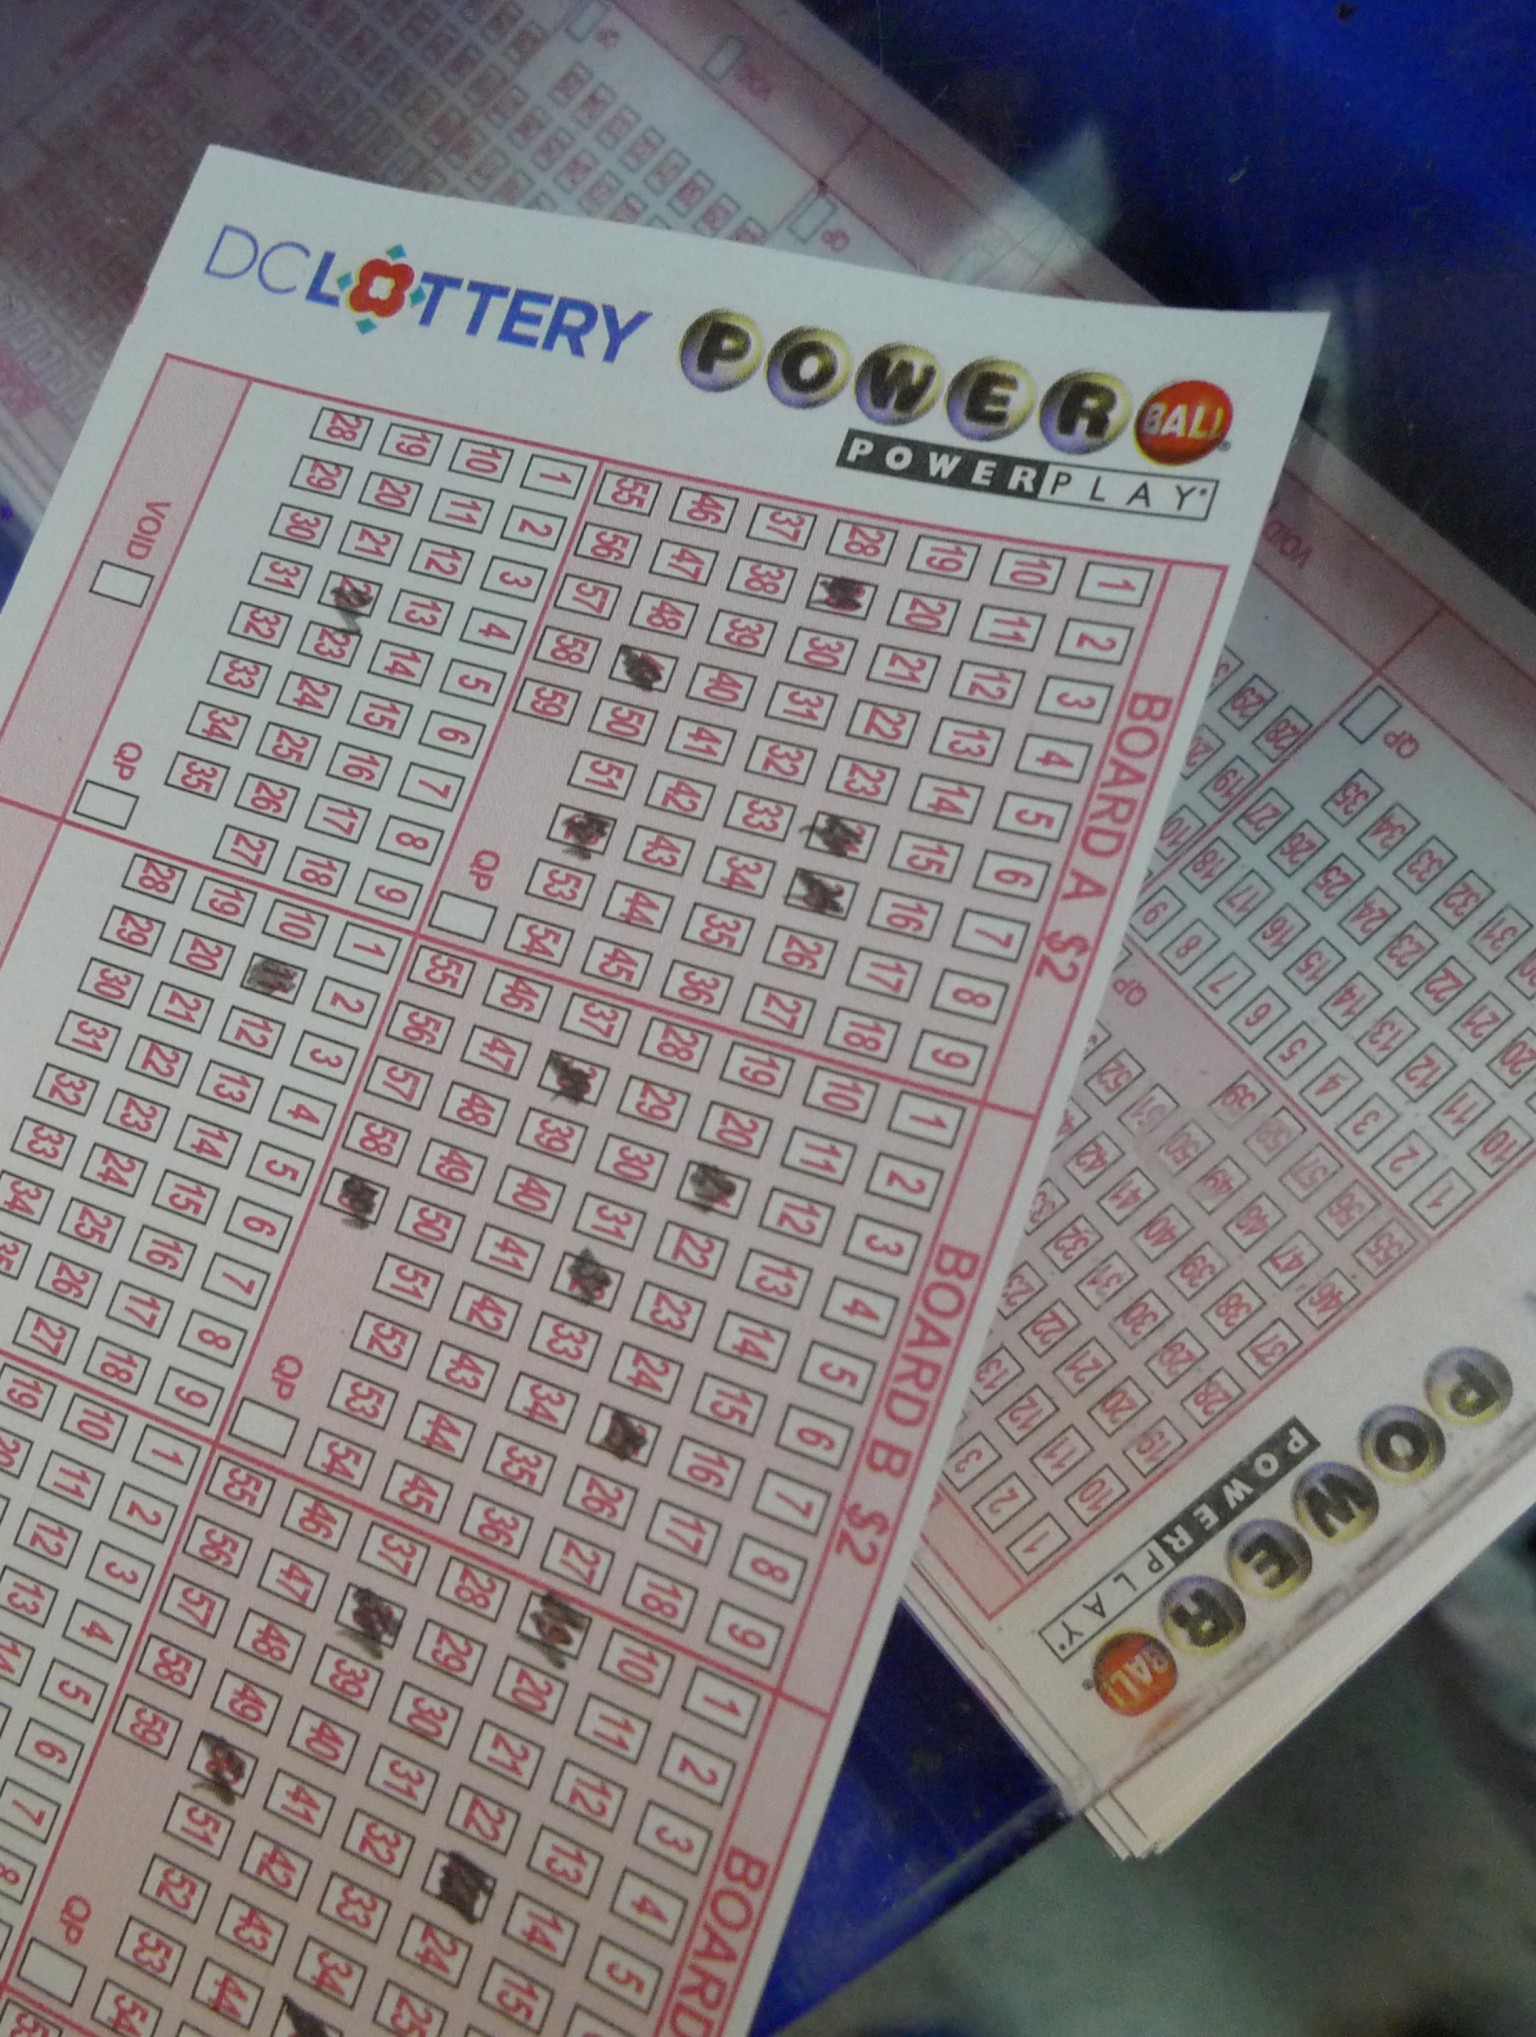 Winning Powerball Numbers For August 7 Drawing: 05, 25, 30, 58, 59 And 321536 x 2037